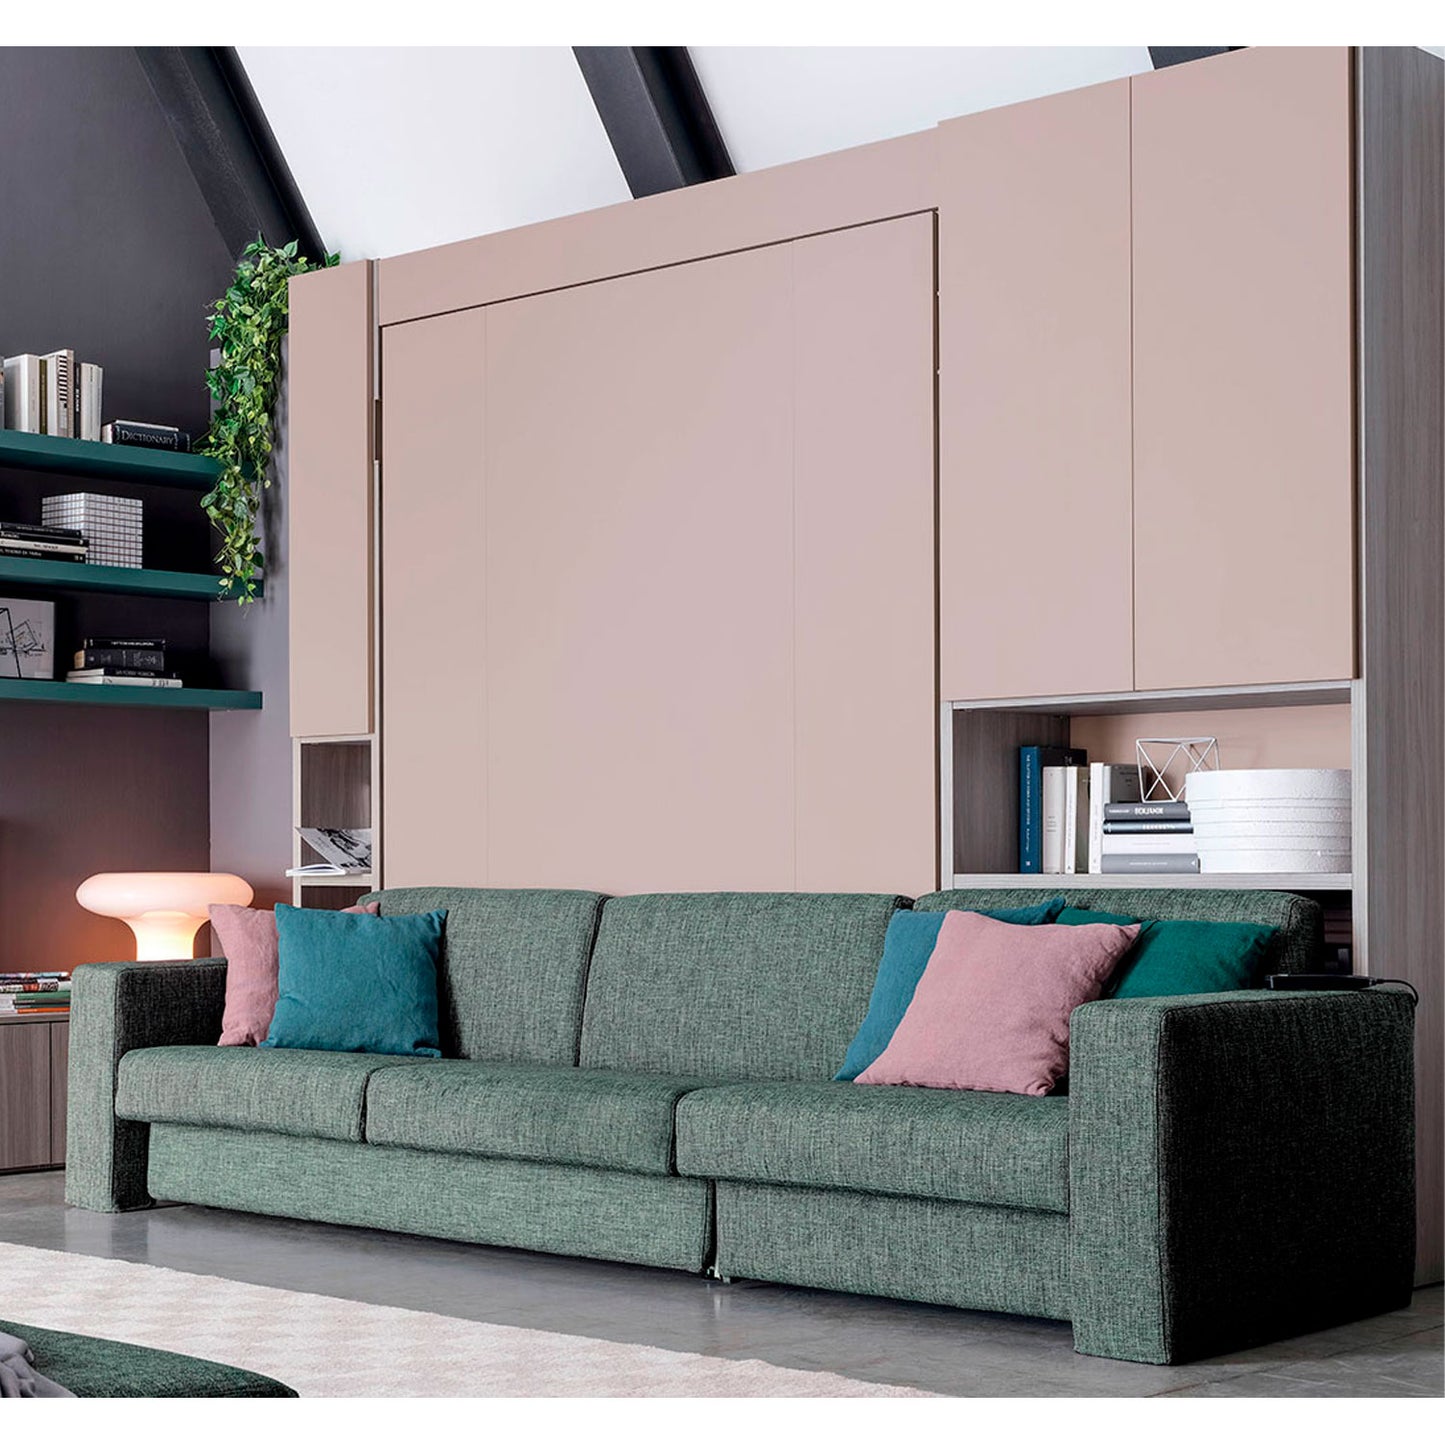 IM20-02 Foldaway Double Murphy Bed by Clever